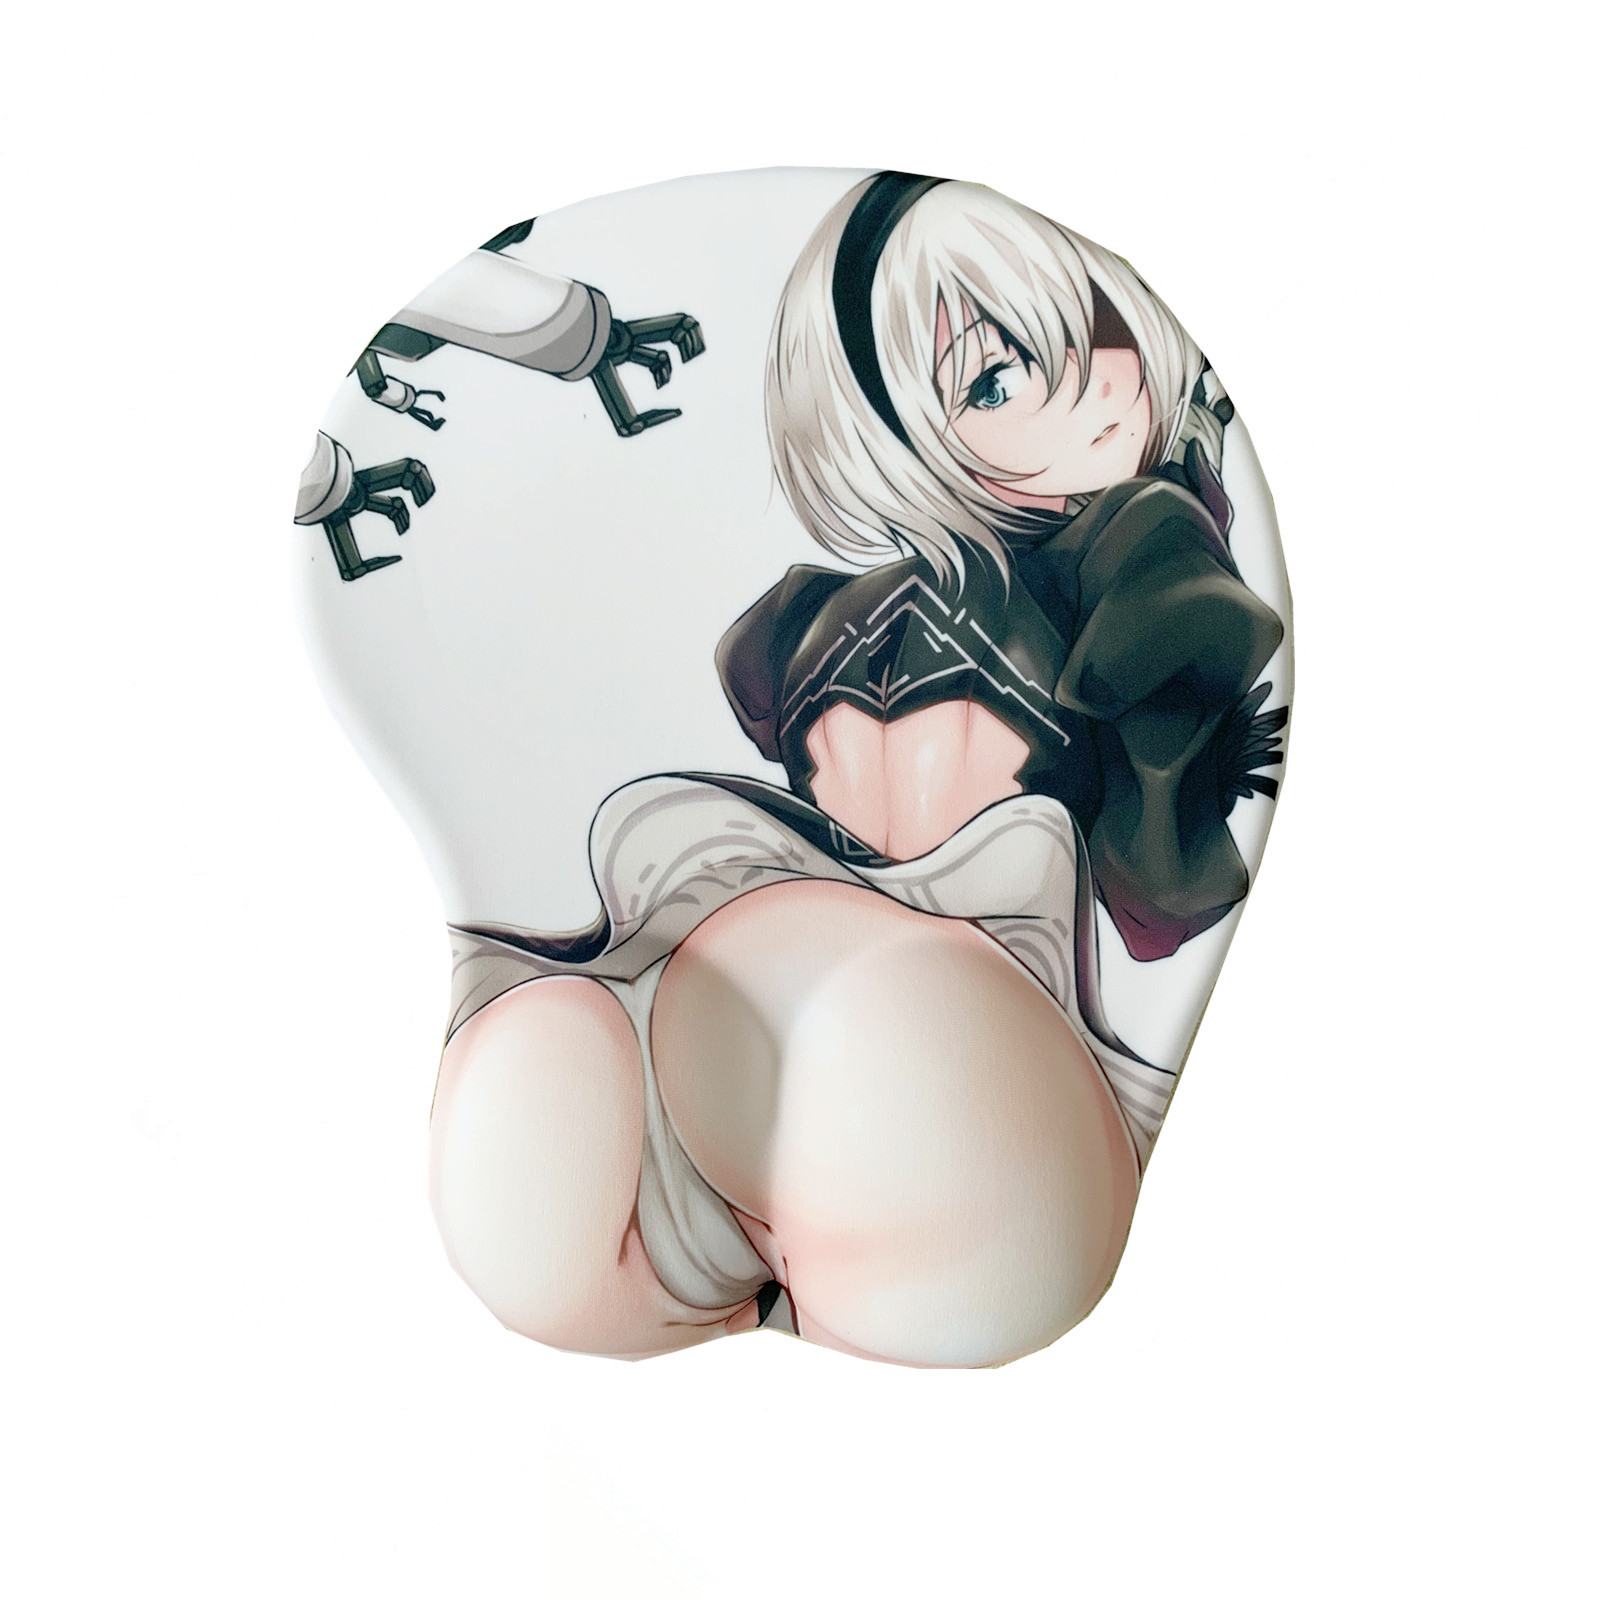 2B Nier Automata Anime 3D Mouse Pads Soft Breast Sexy Butt Wrist Rest Oppai